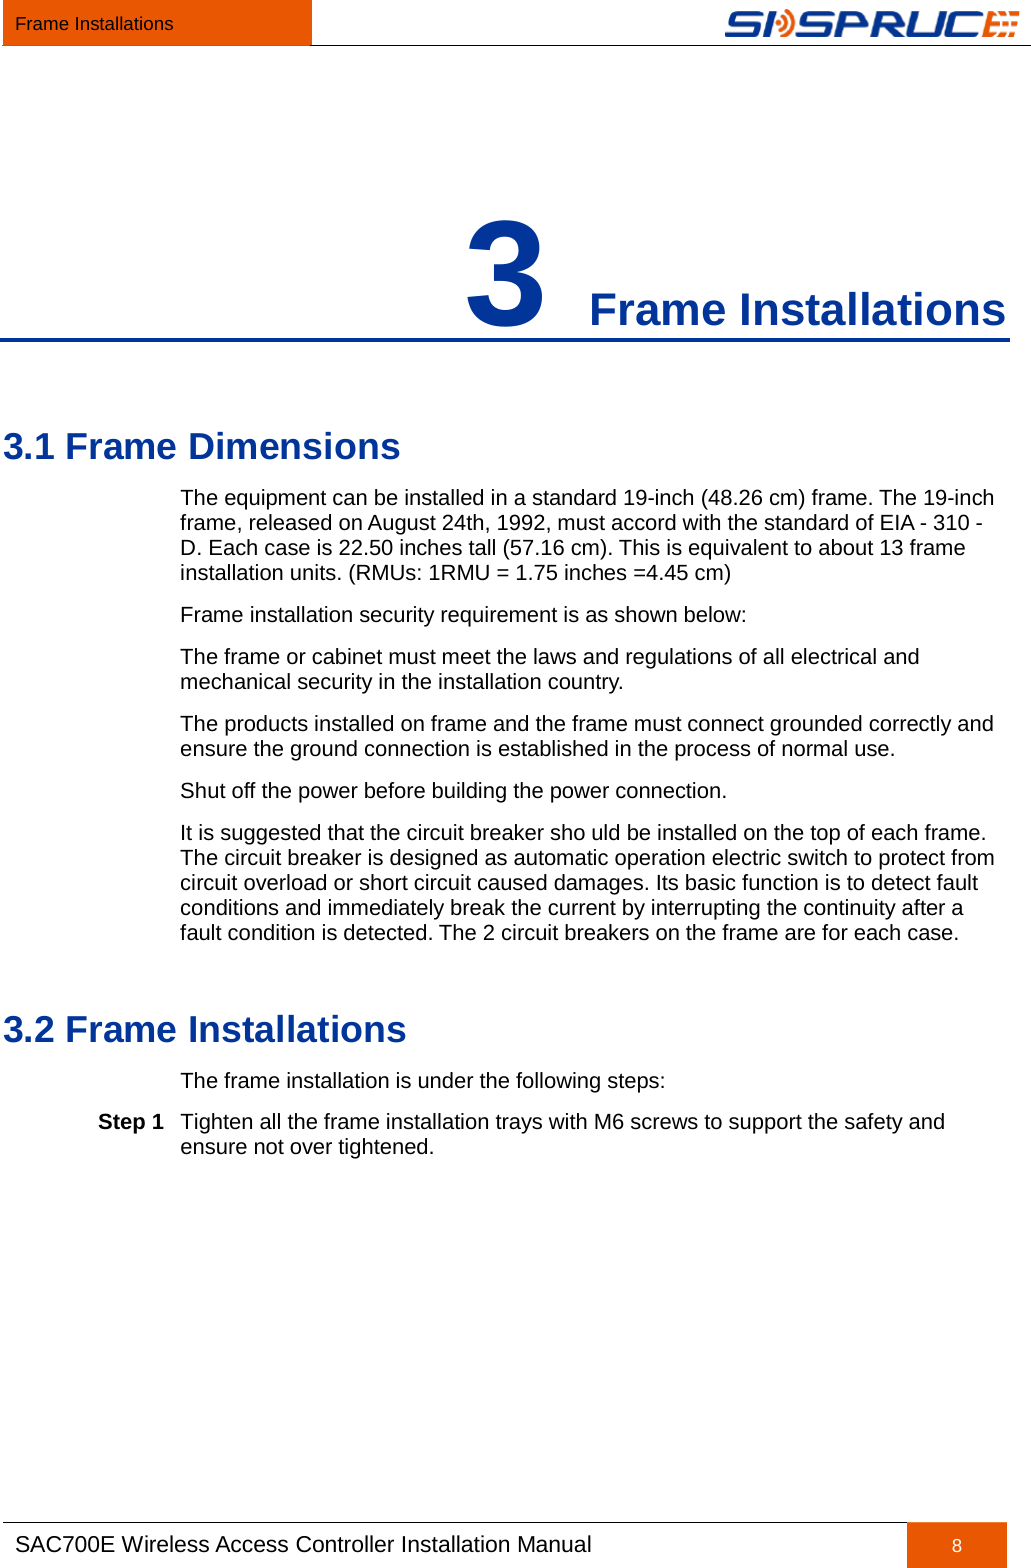 Frame Installations   SAC700E Wireless Access Controller Installation Manual 8  3 Frame Installations 3.1 Frame Dimensions The equipment can be installed in a standard 19-inch (48.26 cm) frame. The 19-inch frame, released on August 24th, 1992, must accord with the standard of EIA - 310 - D. Each case is 22.50 inches tall (57.16 cm). This is equivalent to about 13 frame installation units. (RMUs: 1RMU = 1.75 inches =4.45 cm) Frame installation security requirement is as shown below:   The frame or cabinet must meet the laws and regulations of all electrical and mechanical security in the installation country. The products installed on frame and the frame must connect grounded correctly and ensure the ground connection is established in the process of normal use. Shut off the power before building the power connection. It is suggested that the circuit breaker sho uld be installed on the top of each frame. The circuit breaker is designed as automatic operation electric switch to protect from circuit overload or short circuit caused damages. Its basic function is to detect fault conditions and immediately break the current by interrupting the continuity after a fault condition is detected. The 2 circuit breakers on the frame are for each case. 3.2 Frame Installations The frame installation is under the following steps: Step 1 Tighten all the frame installation trays with M6 screws to support the safety and ensure not over tightened.   